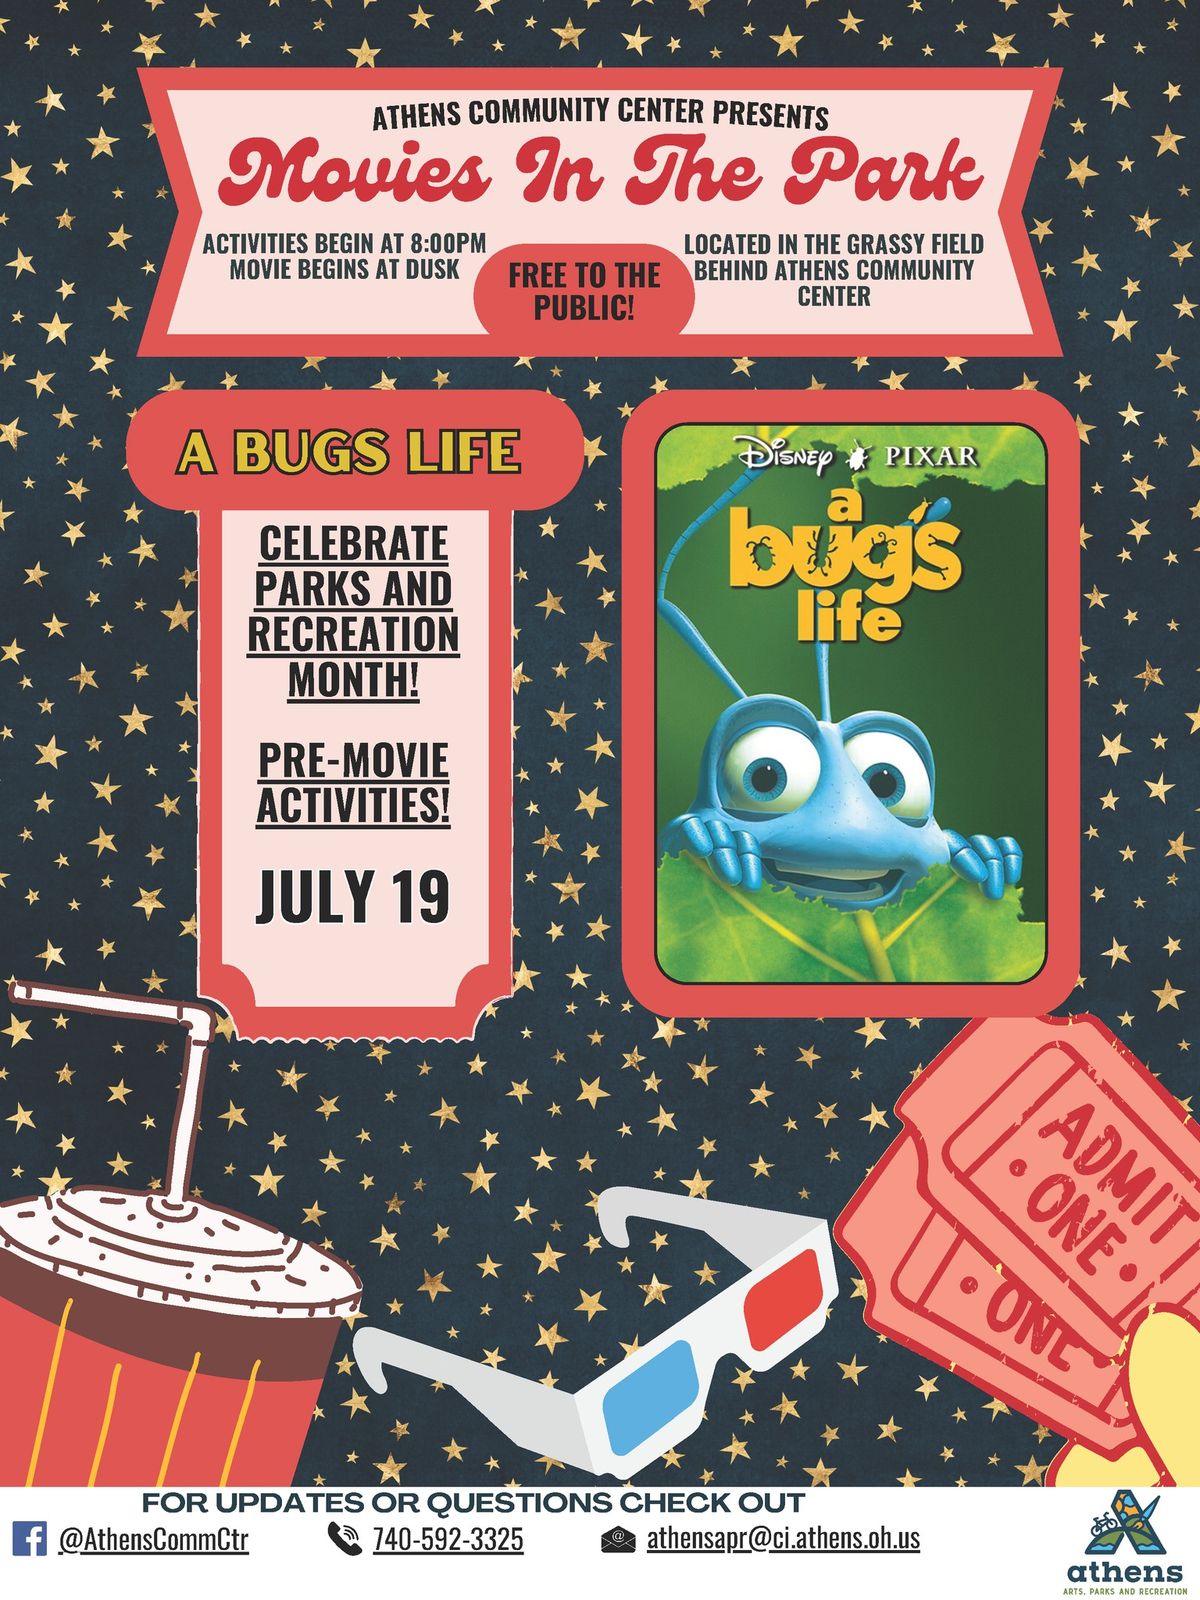 Free Summer Movies in the Park Series - A Bug's Life